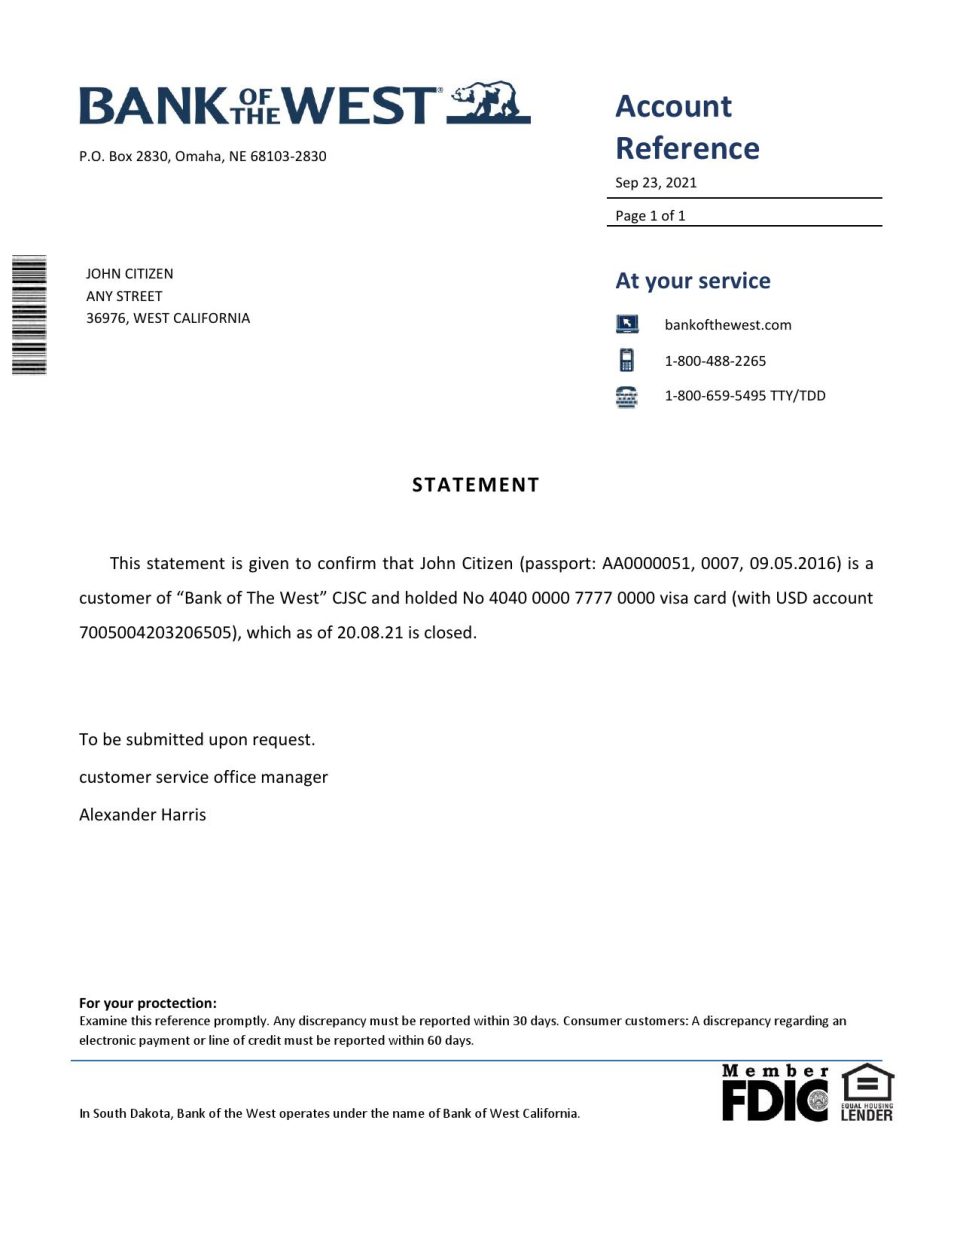 Download USA Bank of the West Bank Reference Letter Templates | Editable Word